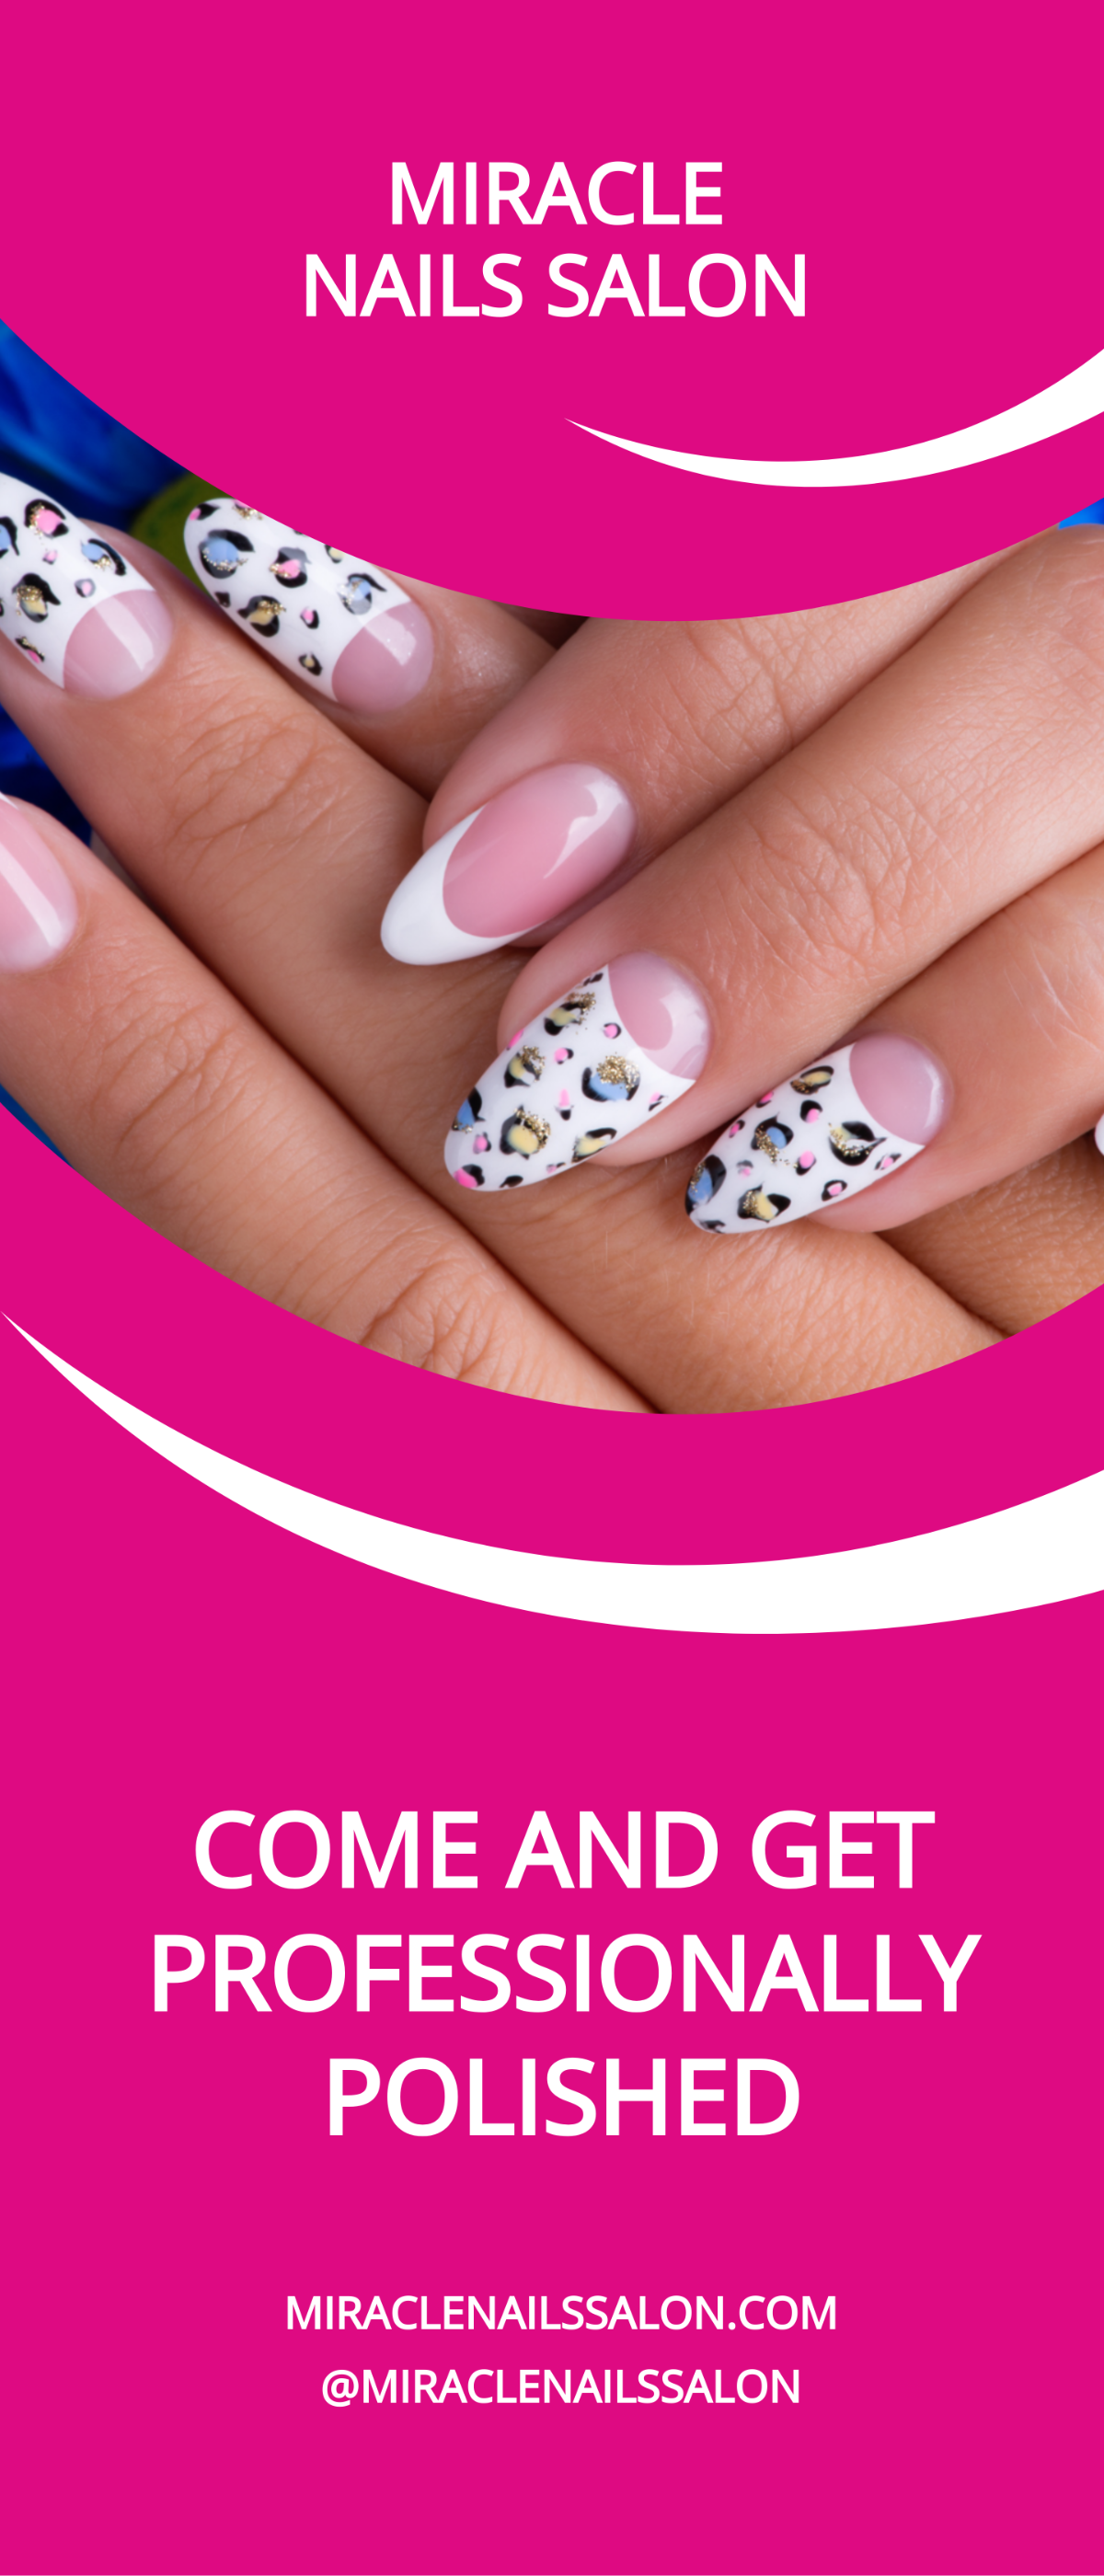 Nail Studio Rollup Banner Template